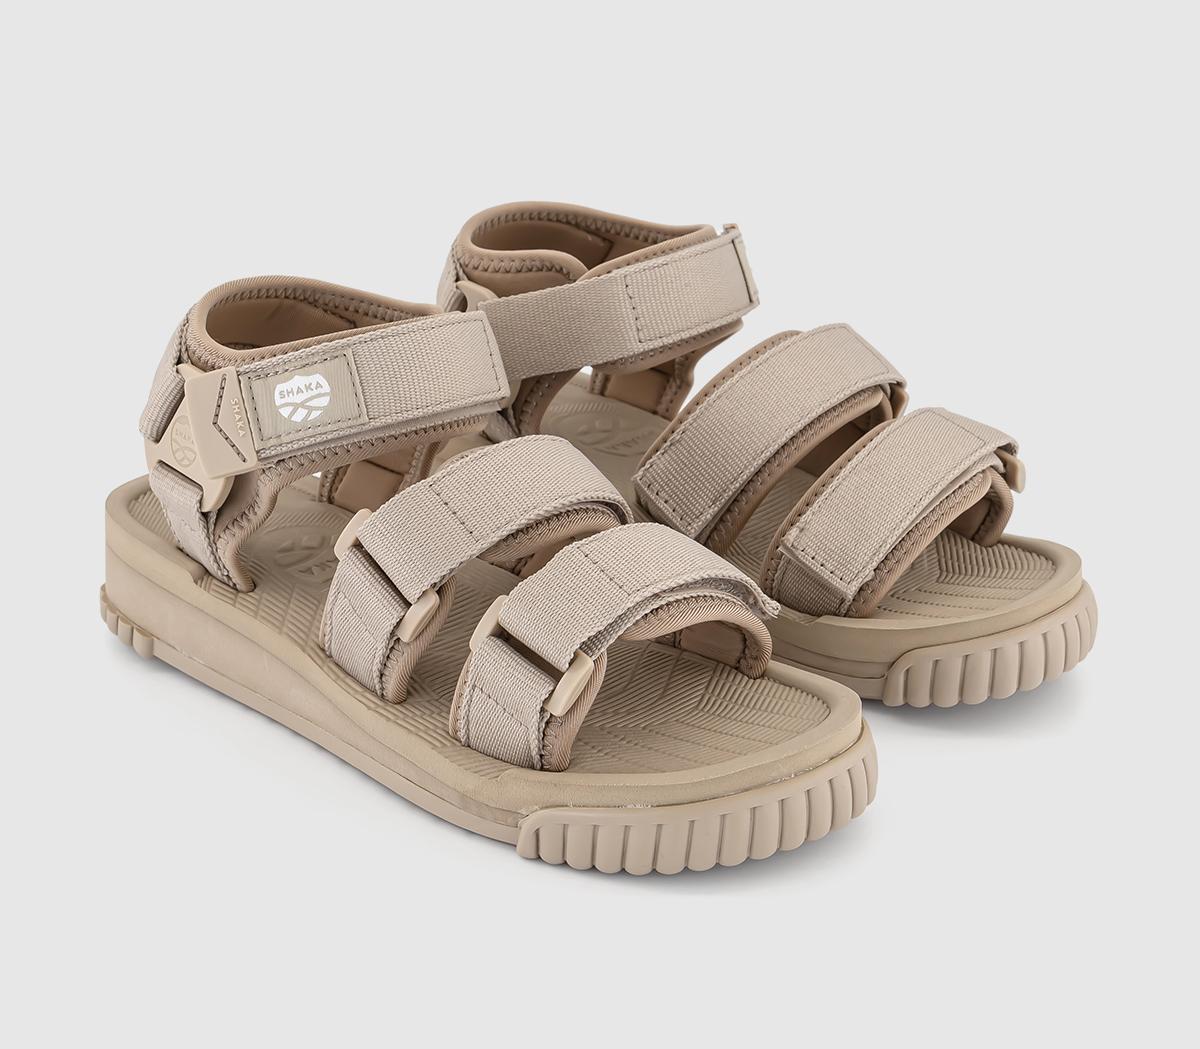 Shaka Neo Bungy Sandals Taupe Natural, 7